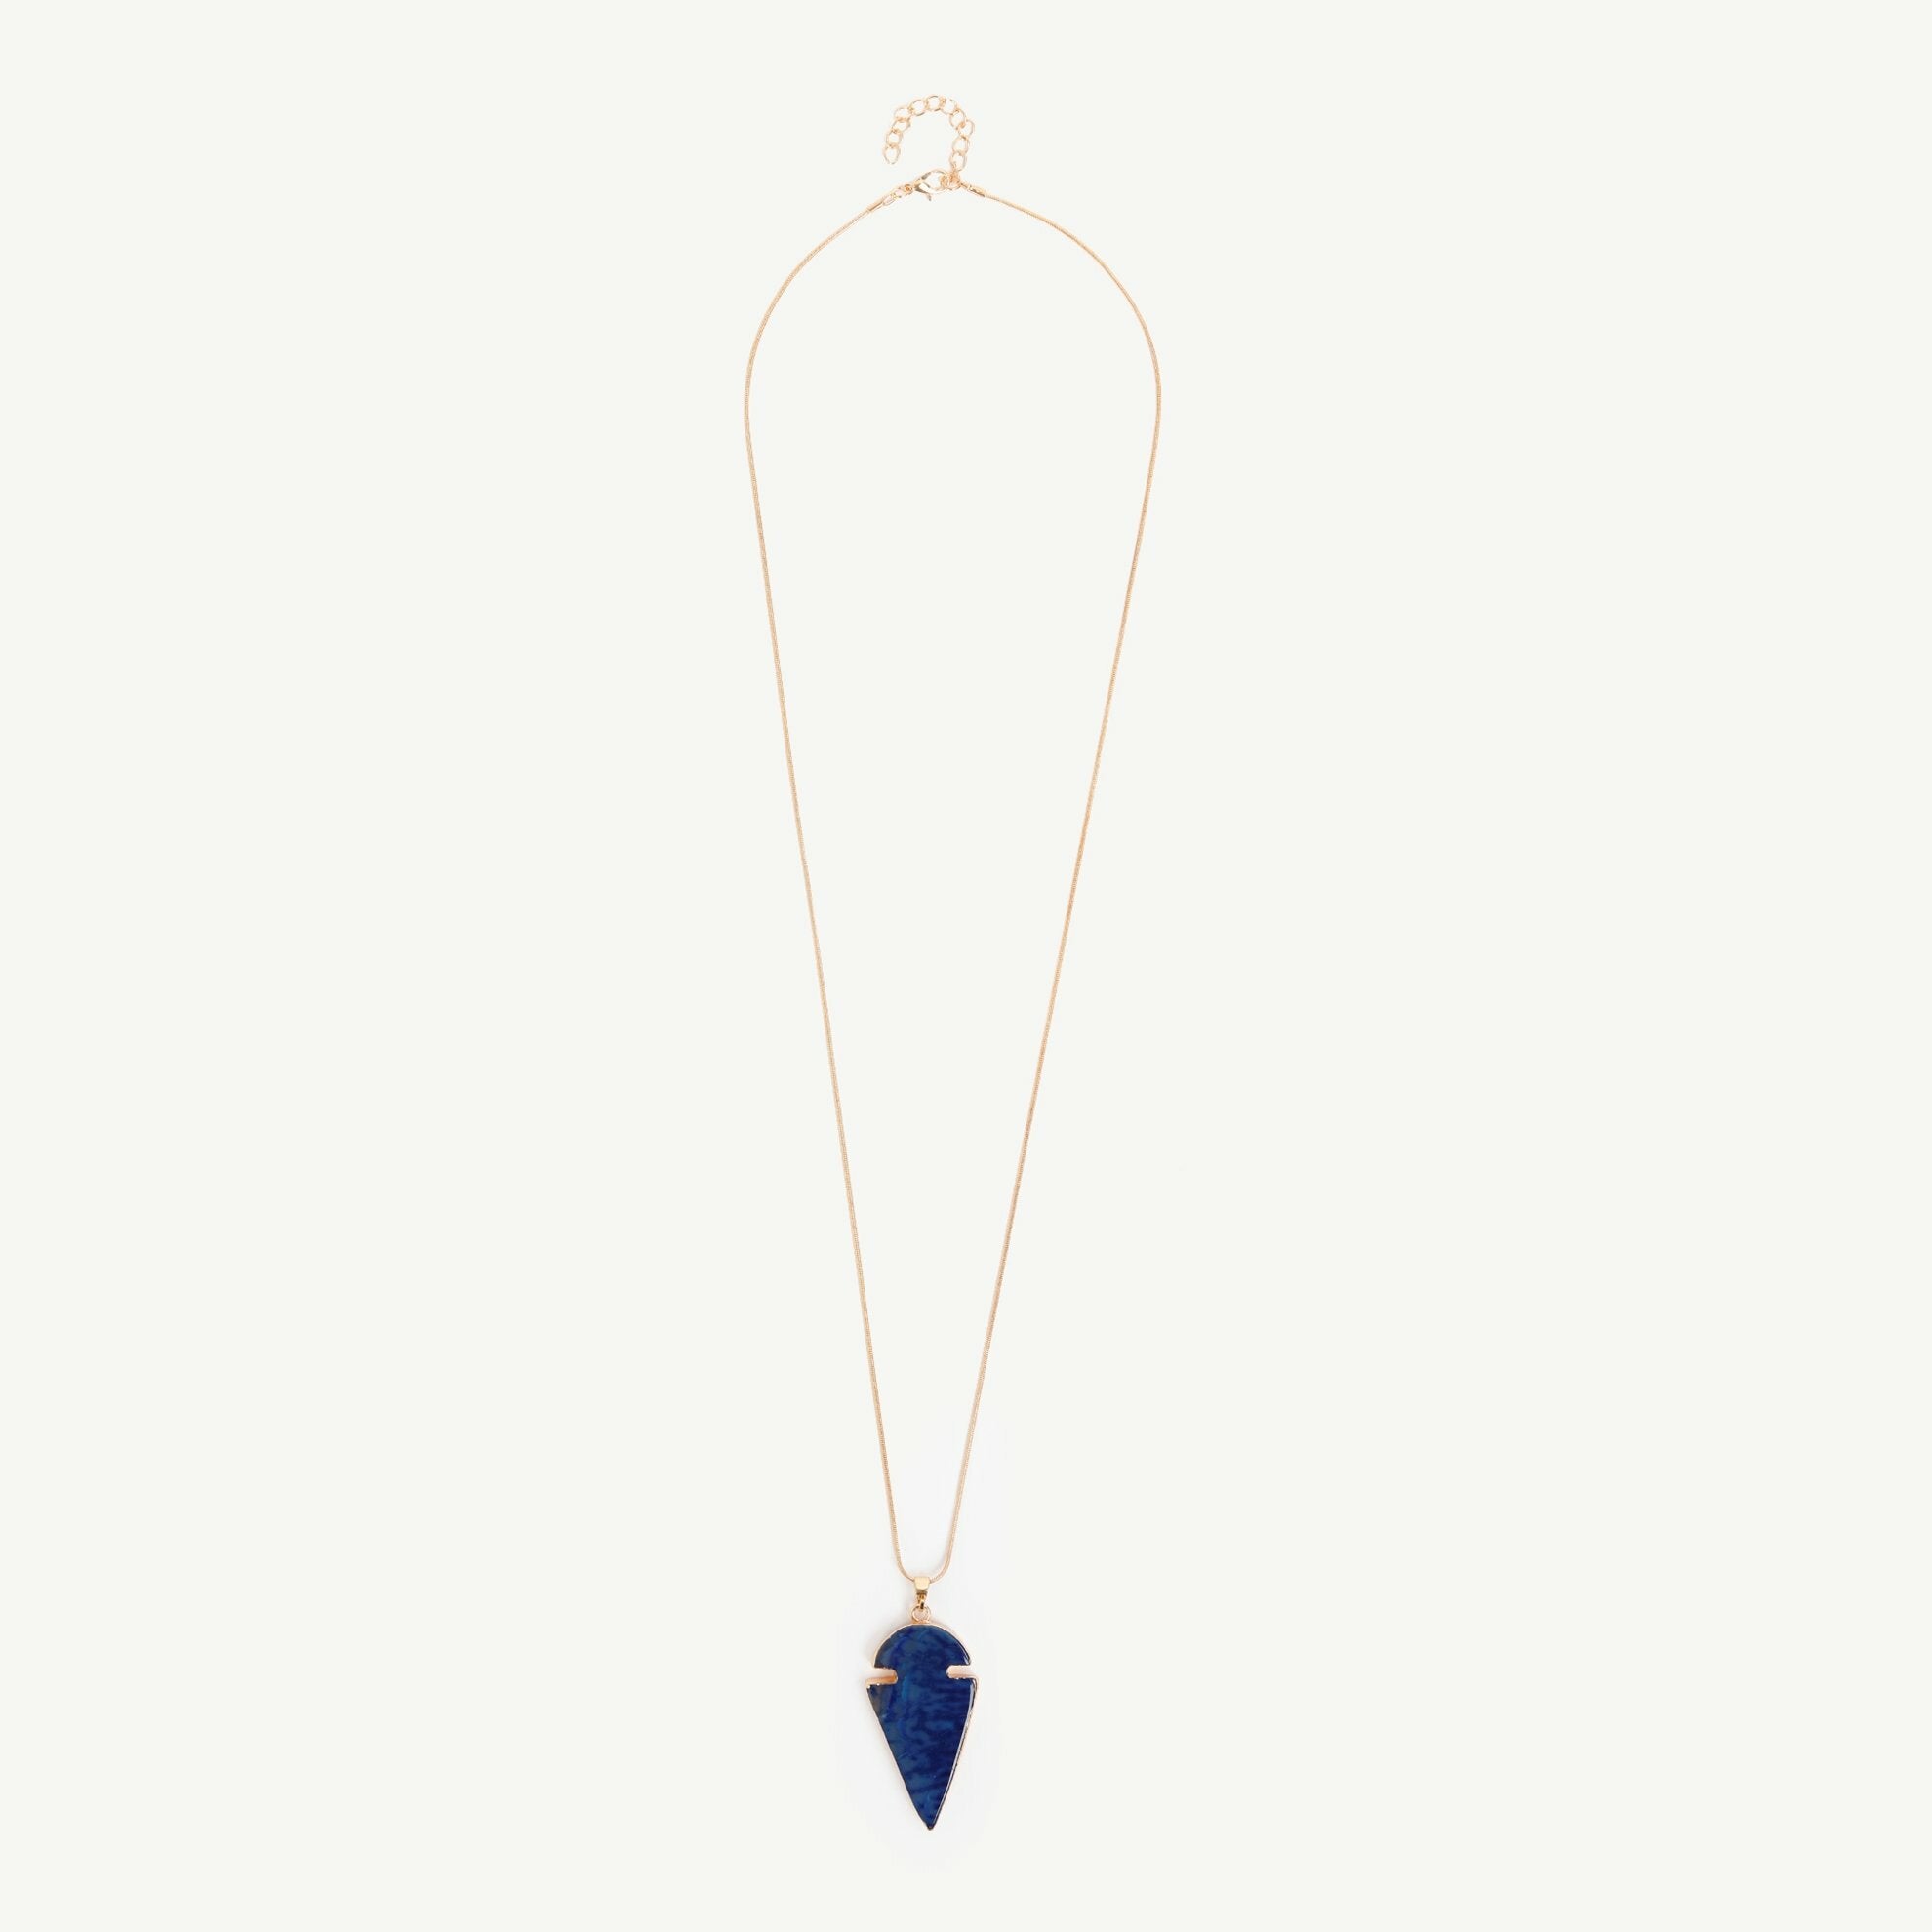 Arrow shaped blue necklace complete look.